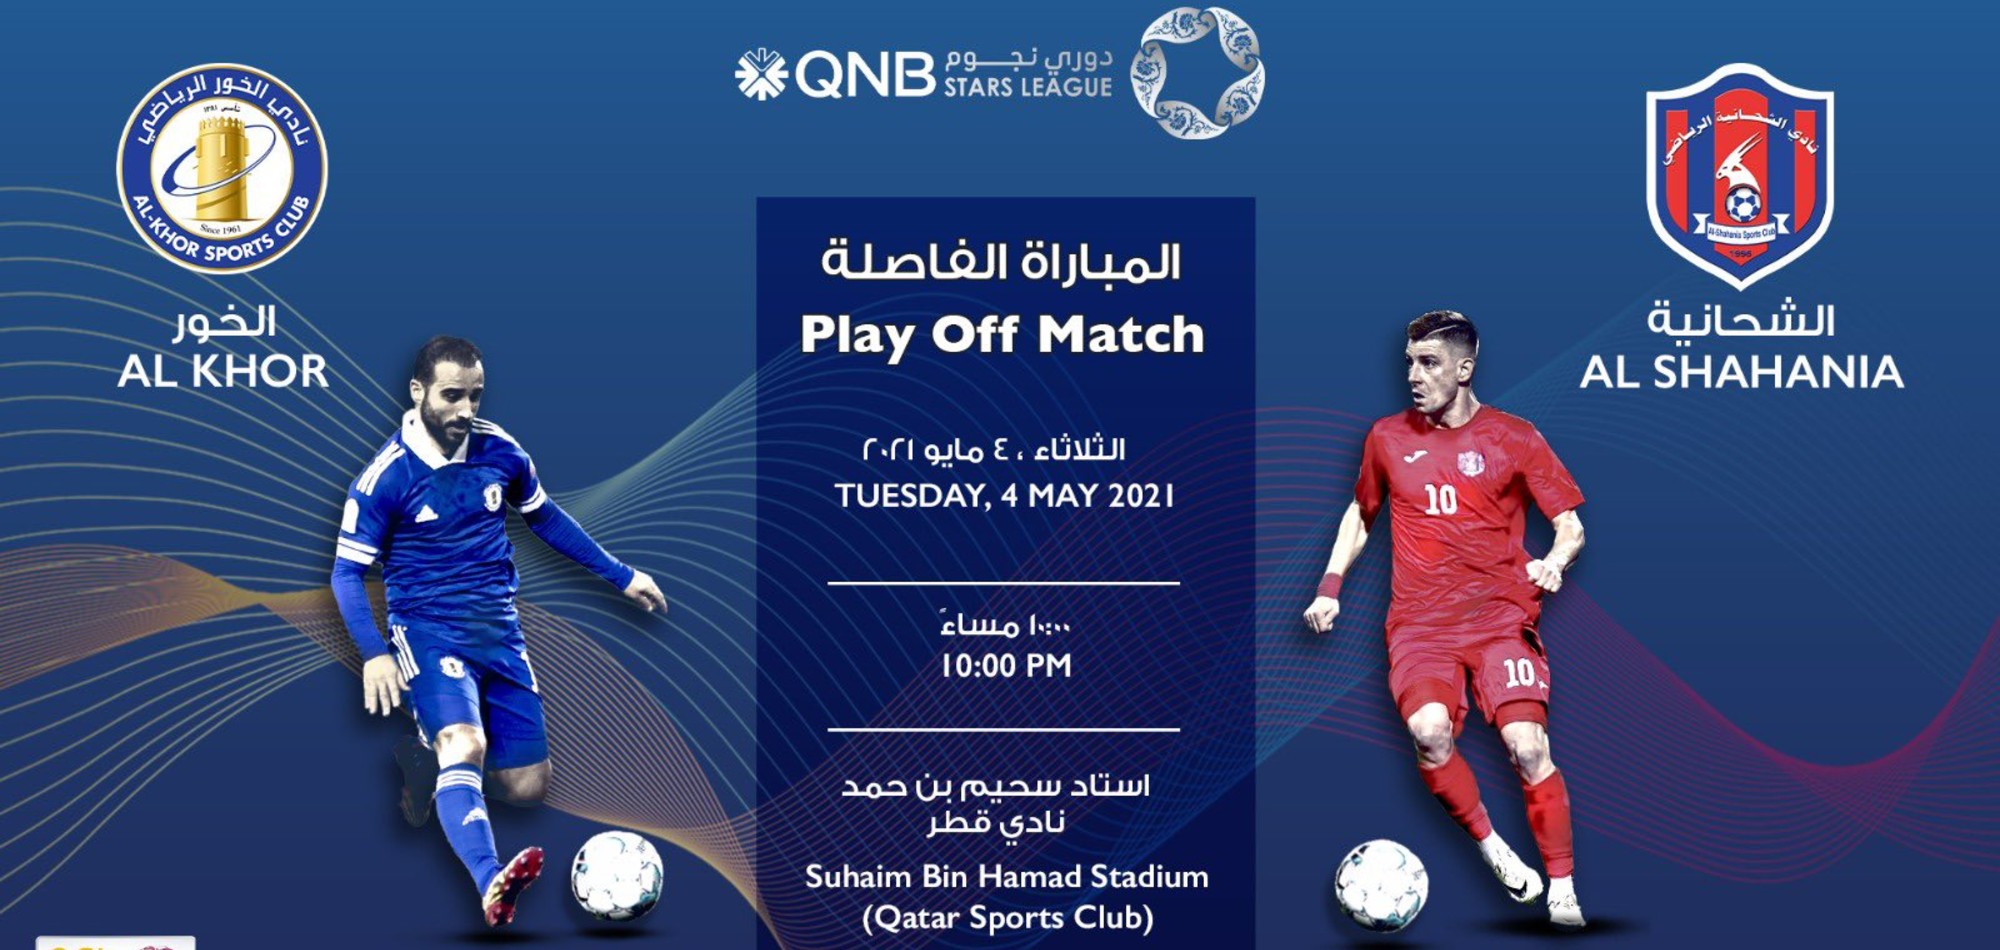 Al-Khor and Al Shahania eager for a spot in the QNB Stars League as the playoff match gets underway tonight